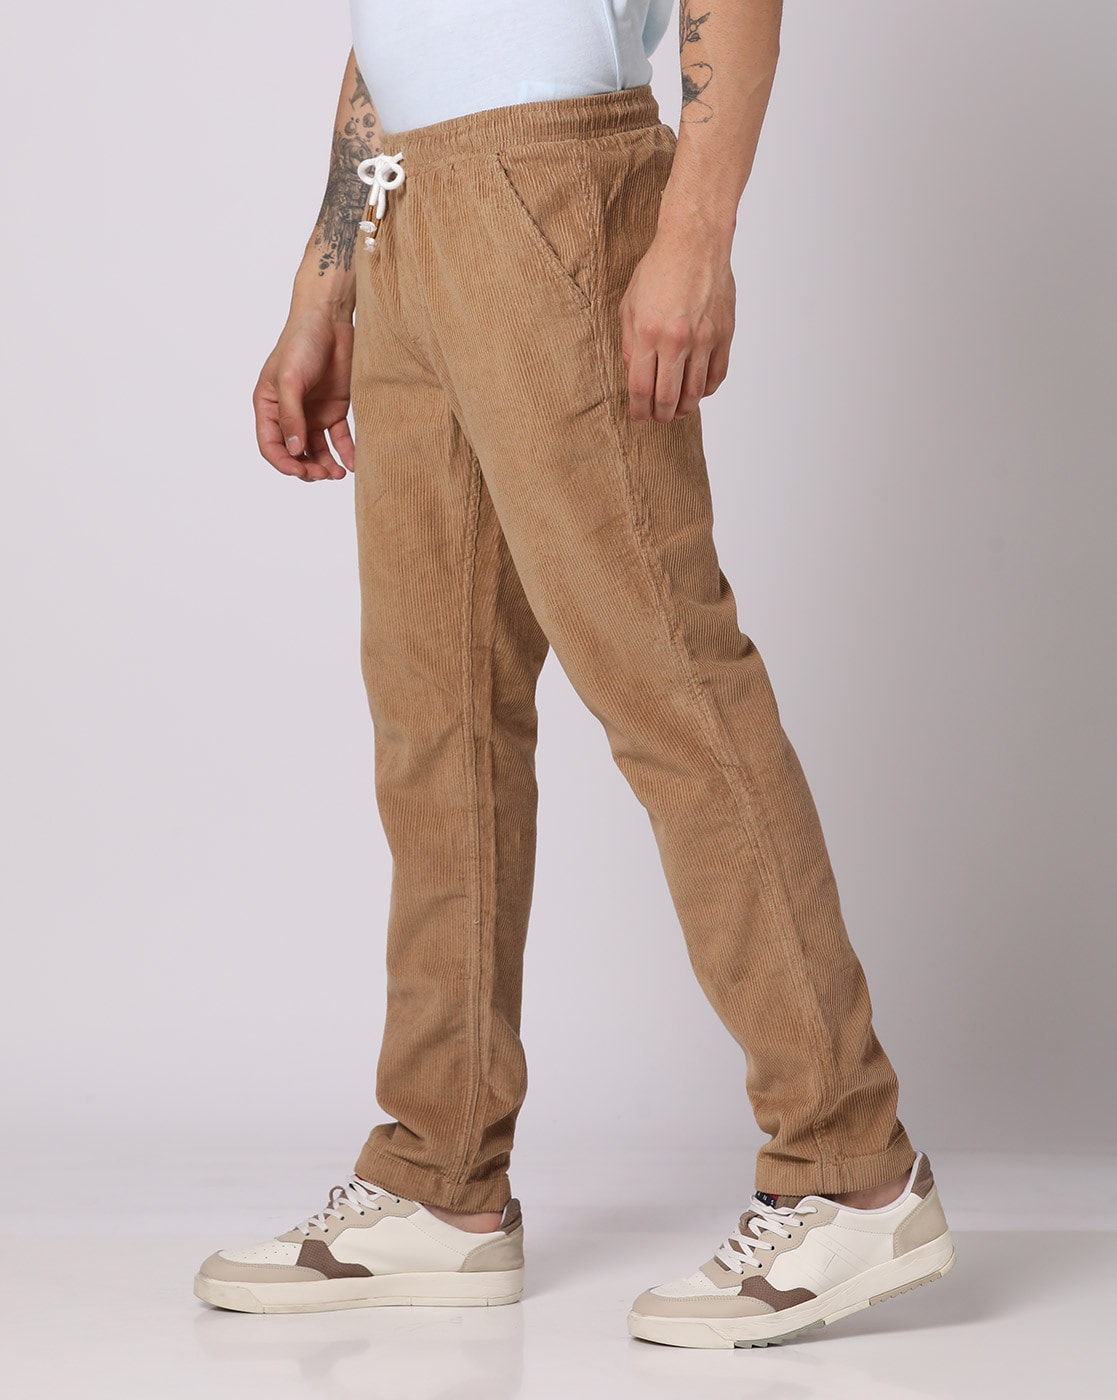 Buy U.S. Polo Assn. Corduroy Solid Casual Trousers - NNNOW.com